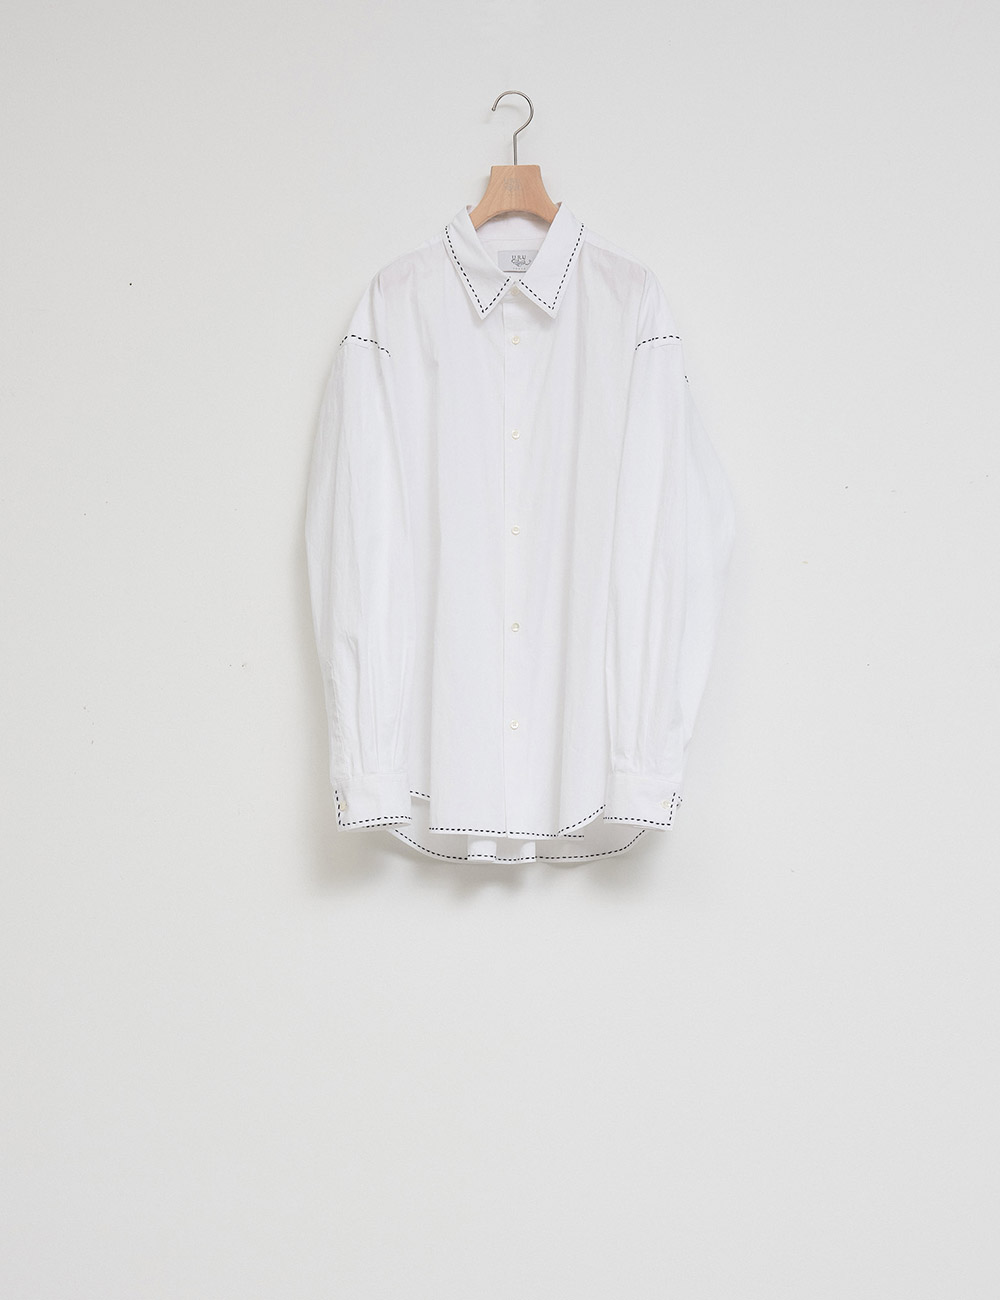 Atelier Made Long Sleeve Shirts Type A